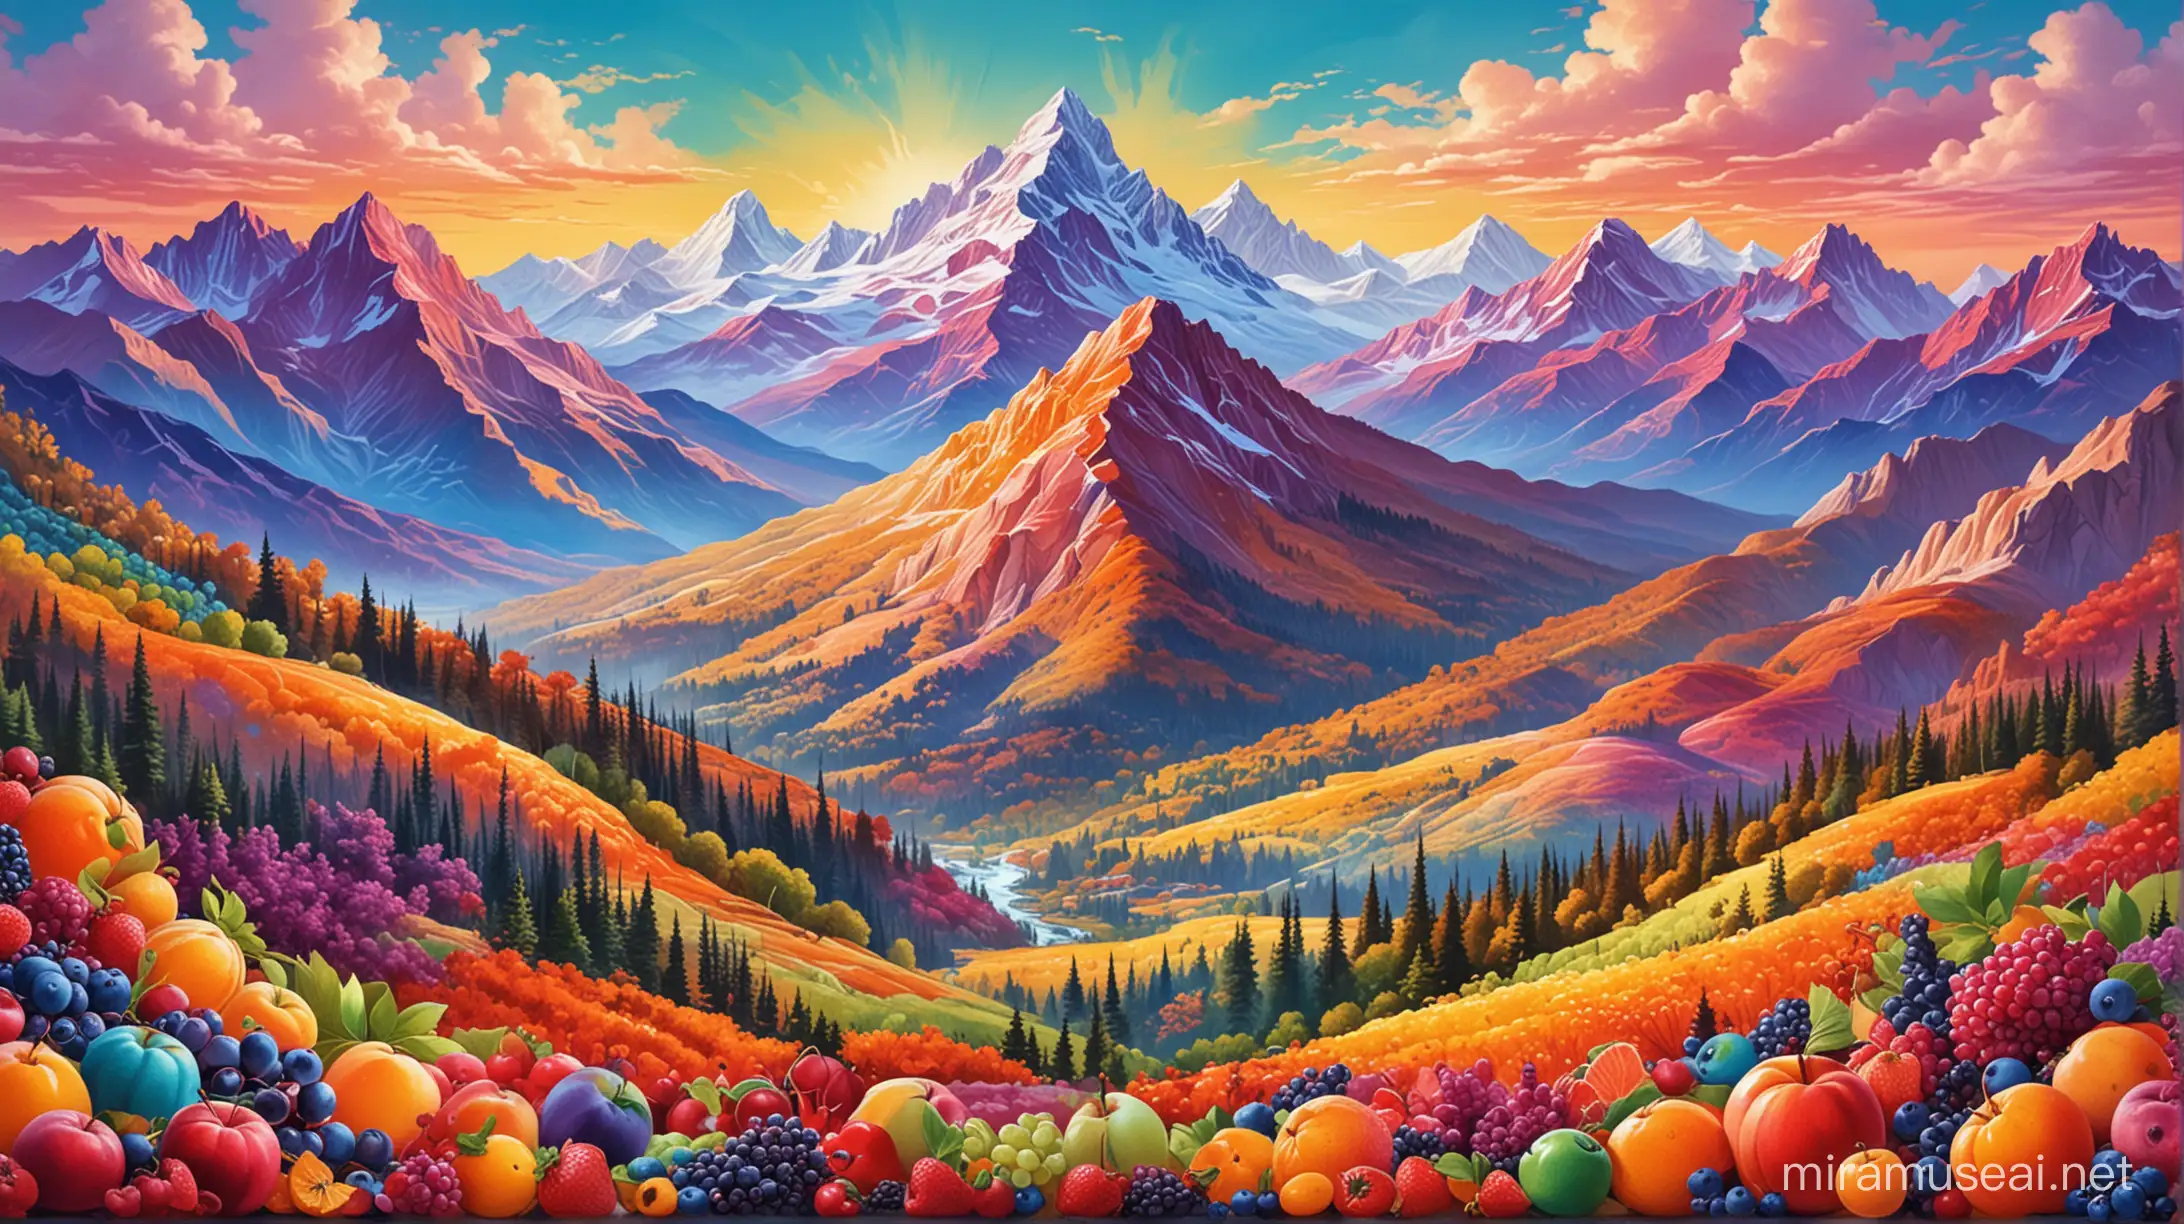 Vibrant Fruit Painting A Colorful Fantasy of Mountains and Delightful Treats